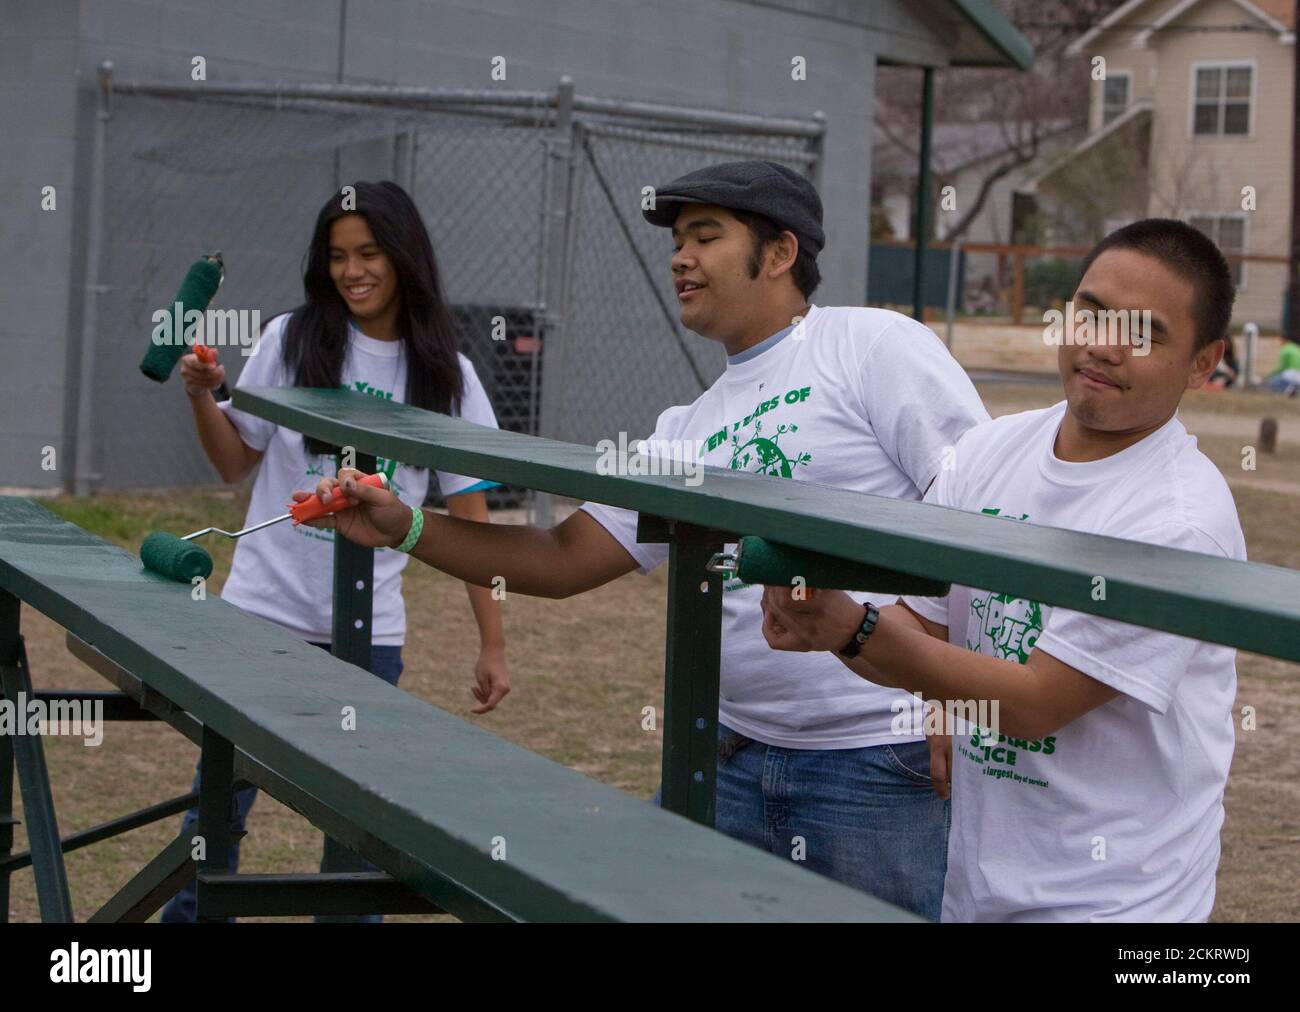 Austin, TX February 14, 2009: University of Texas at Austin students, including members of the Filipino-American Students Assn., work on sprucing up houses and public areas in east Austin as part of the second annual Clinton Global Initiative University, a conference bringing together students to take action on global challenges such as poverty, hunger, energy, climate change and global health. The program is patterned after Clinton Global Initiative Foundation formed by President Bill Clinton. ©Bob Daemmrich Stock Photo